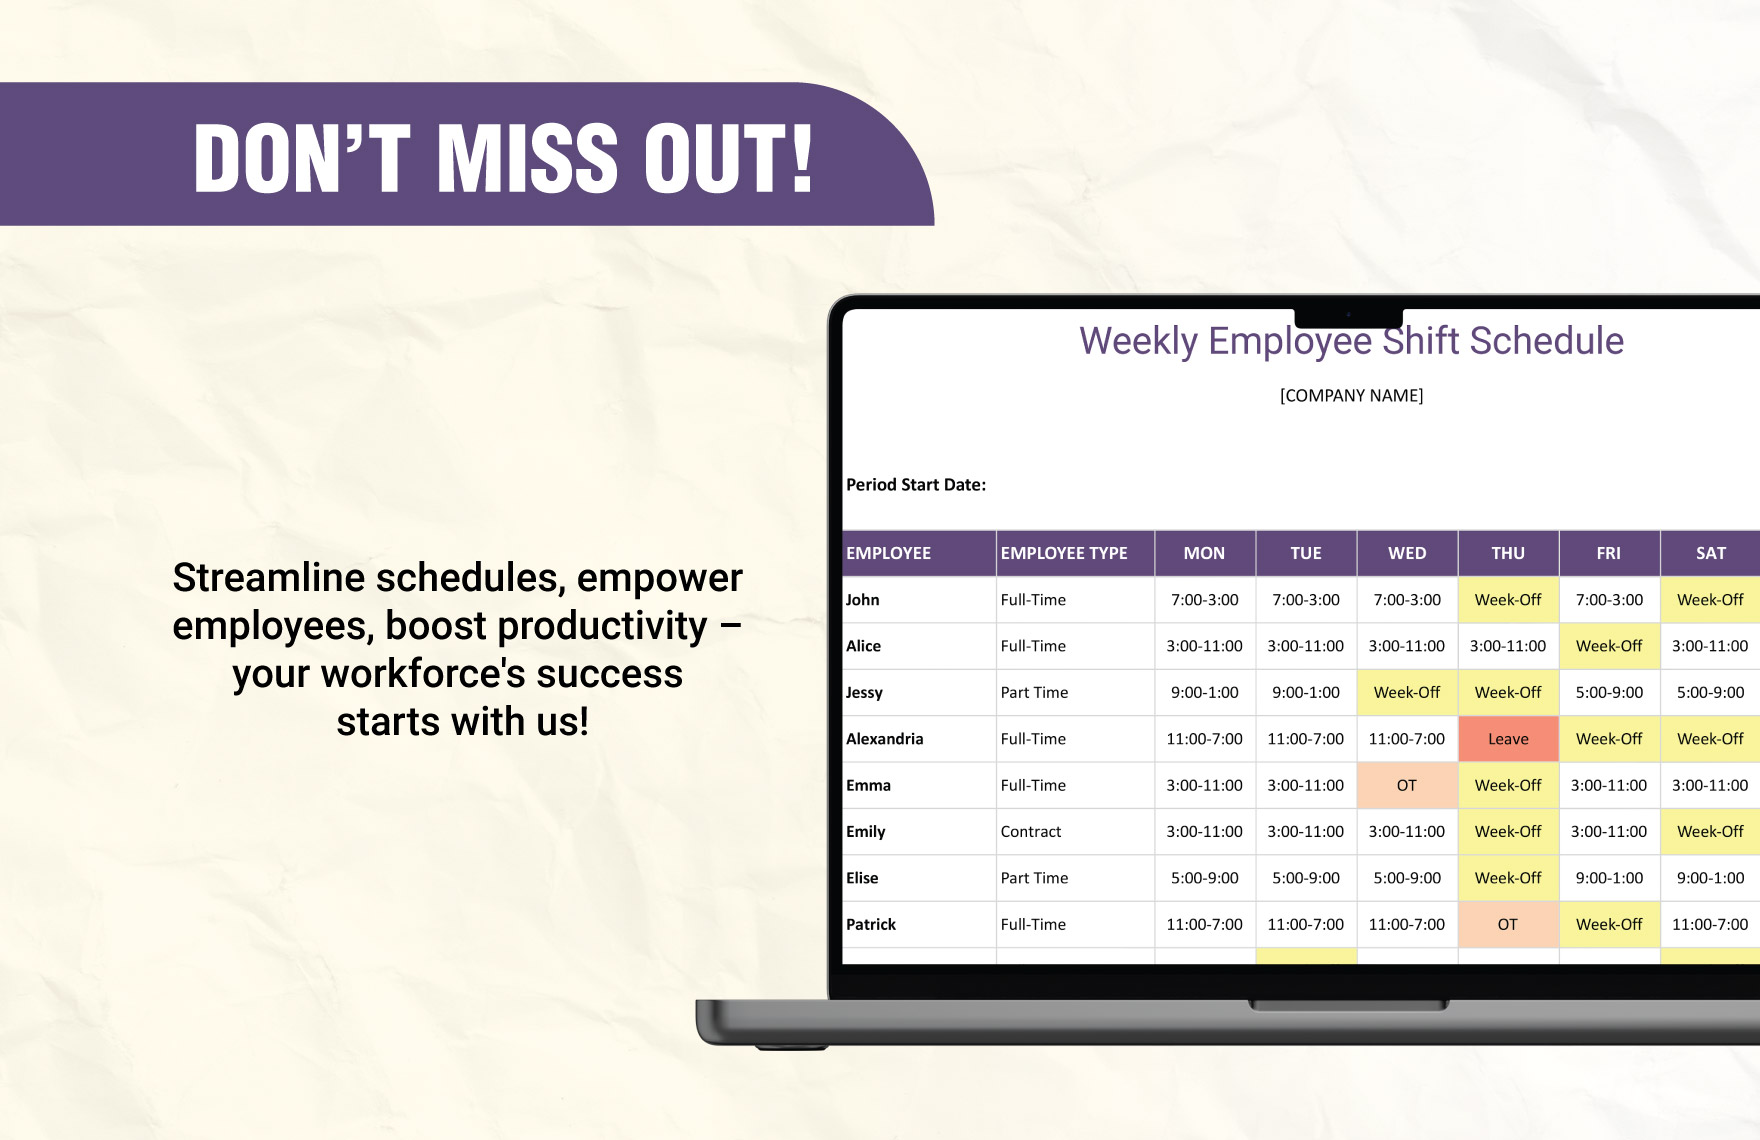 Sample Weekly Employee Shift Schedule Template